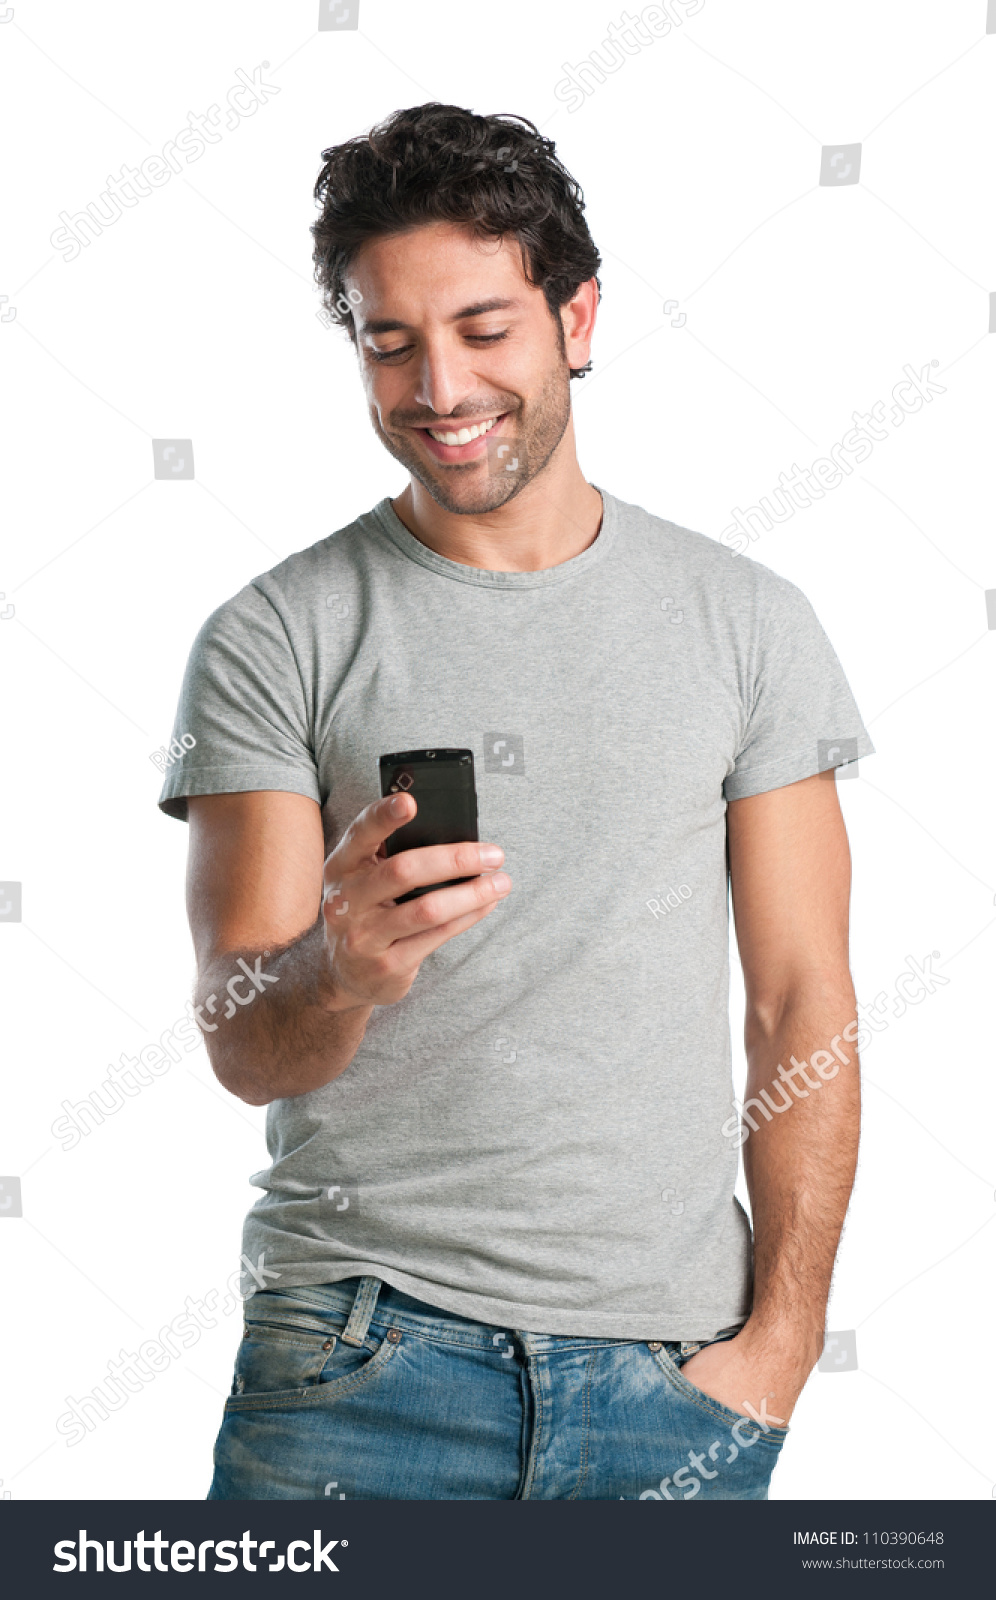 Smiling Young Man Looking His Smart Stock Photo 110390648 - Shutterstock